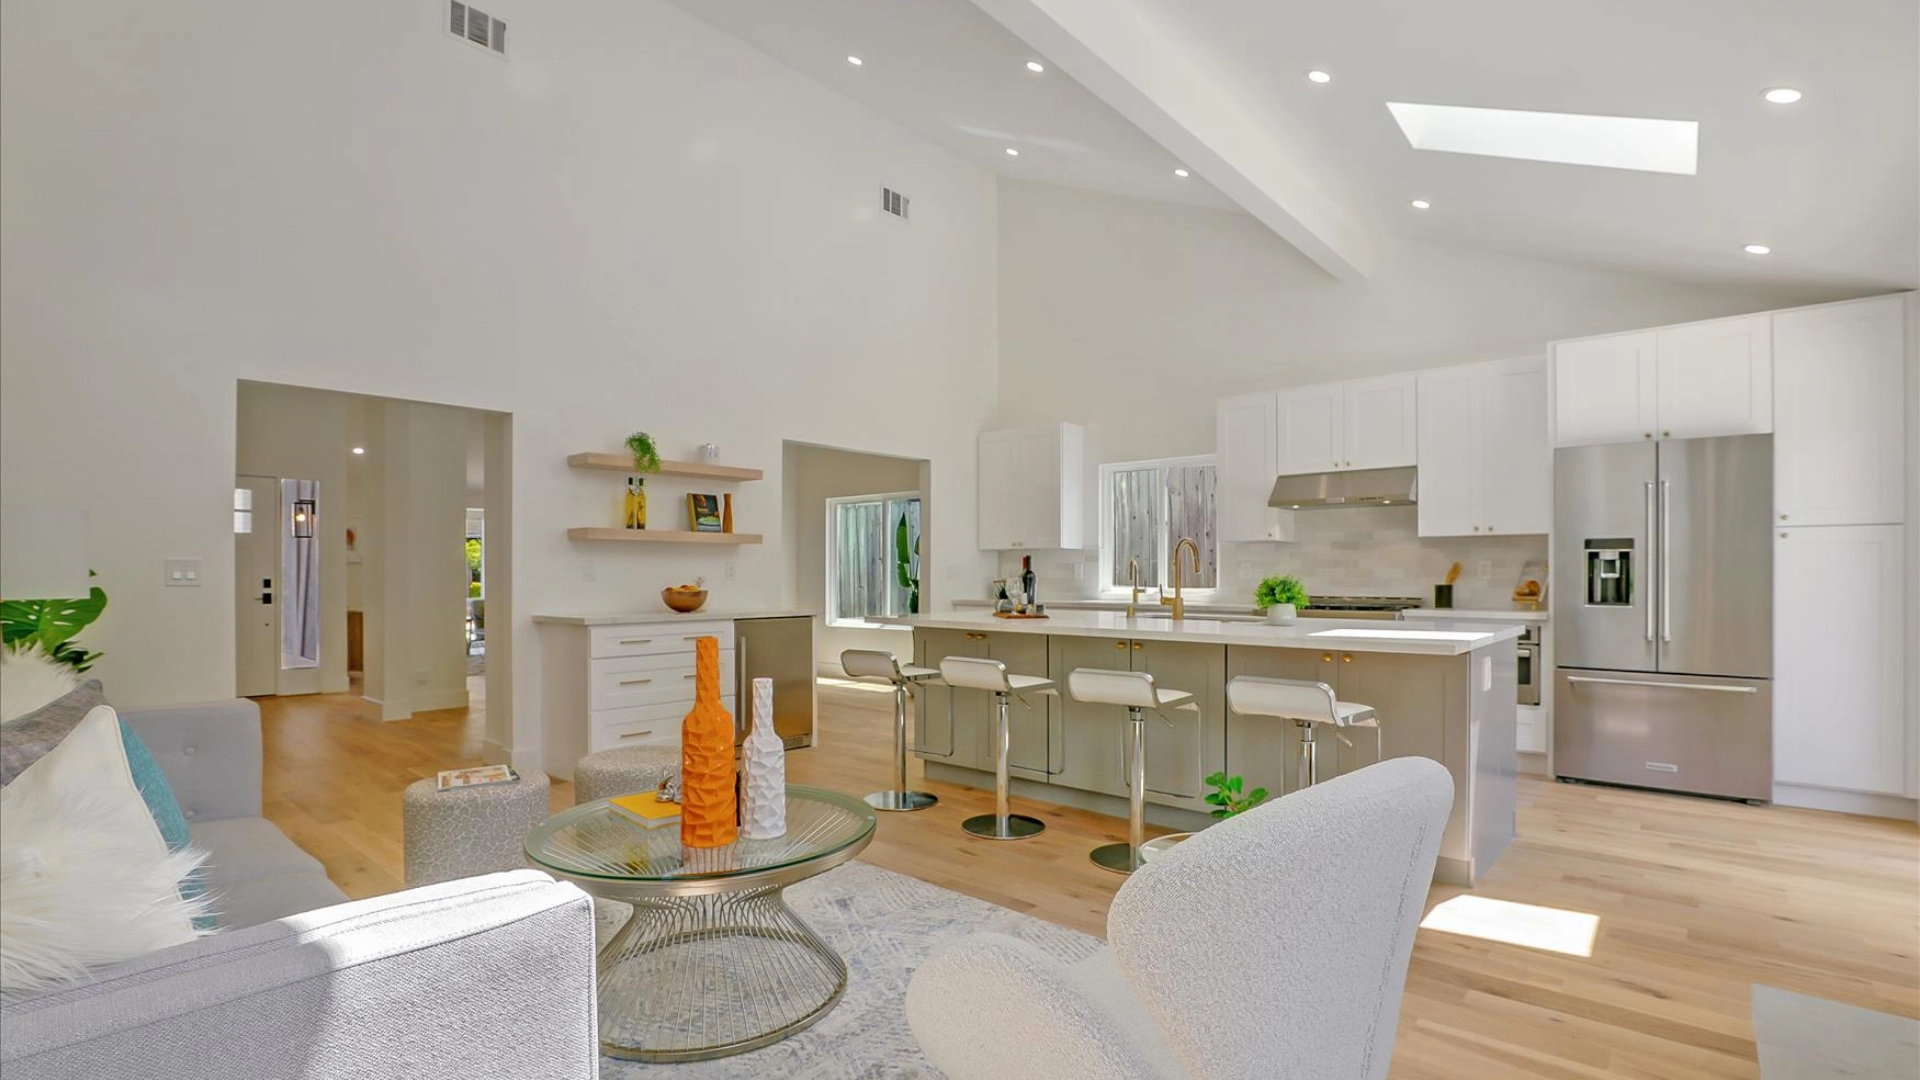 Bright modern kitchen and living area with white cabinets, stainless steel appliances, barstools at the island, and light-colored wooden flooring. An open layout with high ceilings and a skylight.